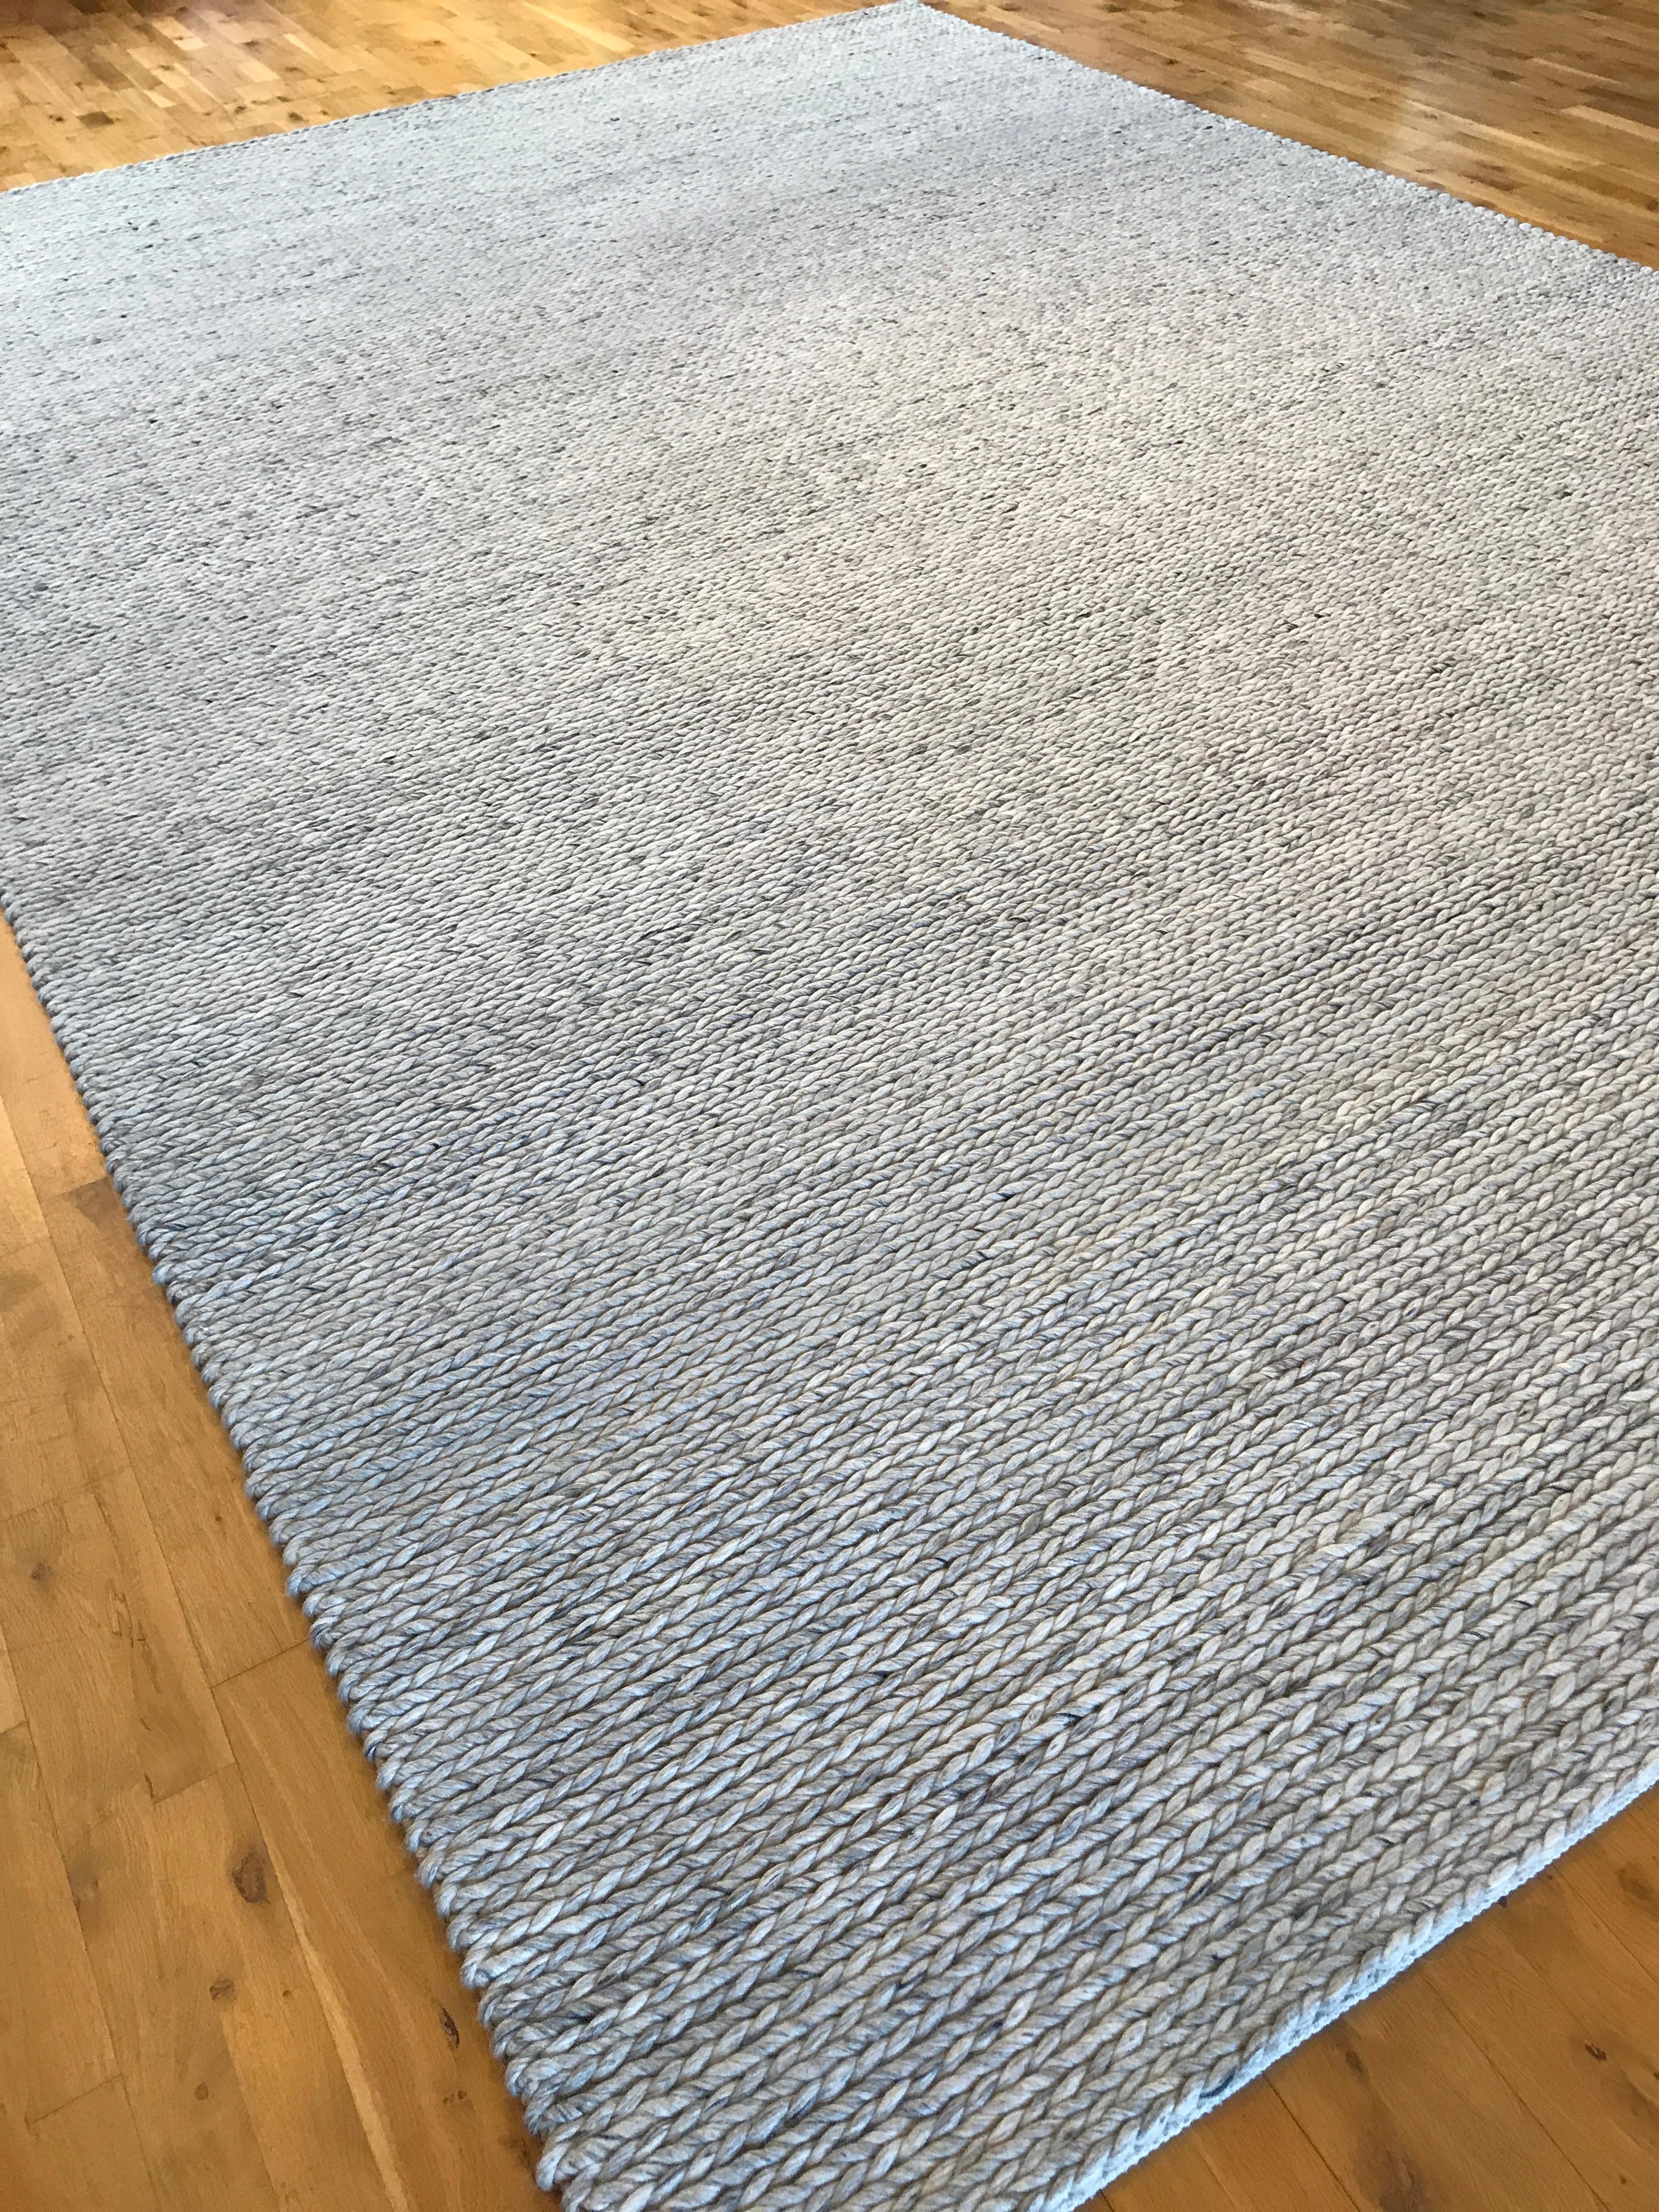 Indian Oatmeal Braided Wool Area Rug For Sale